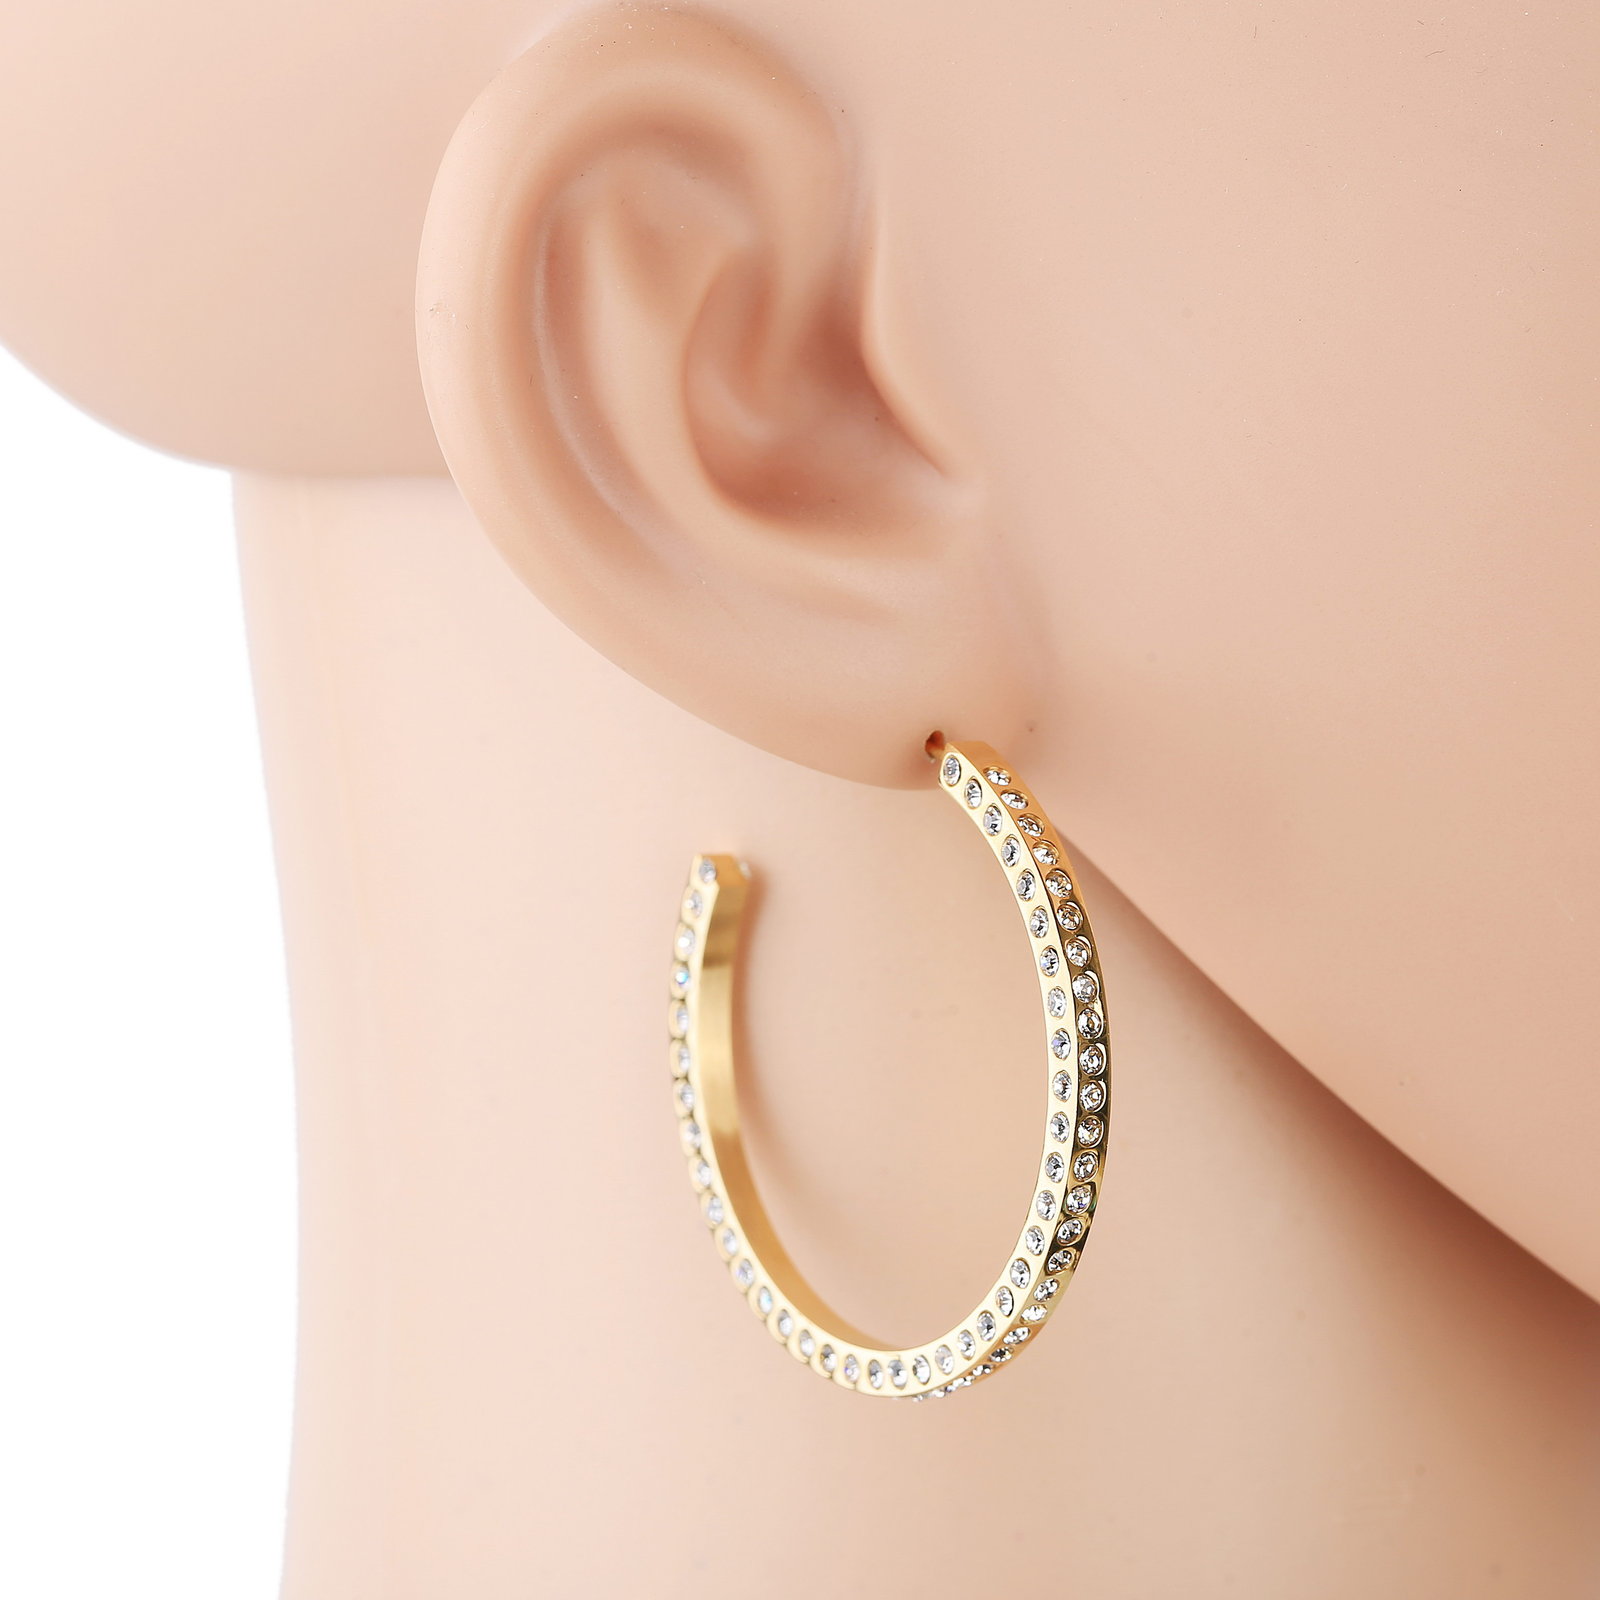 Primary image for Gold Tone Hoop Earrings With Sparkling Swarovski Style Crystals